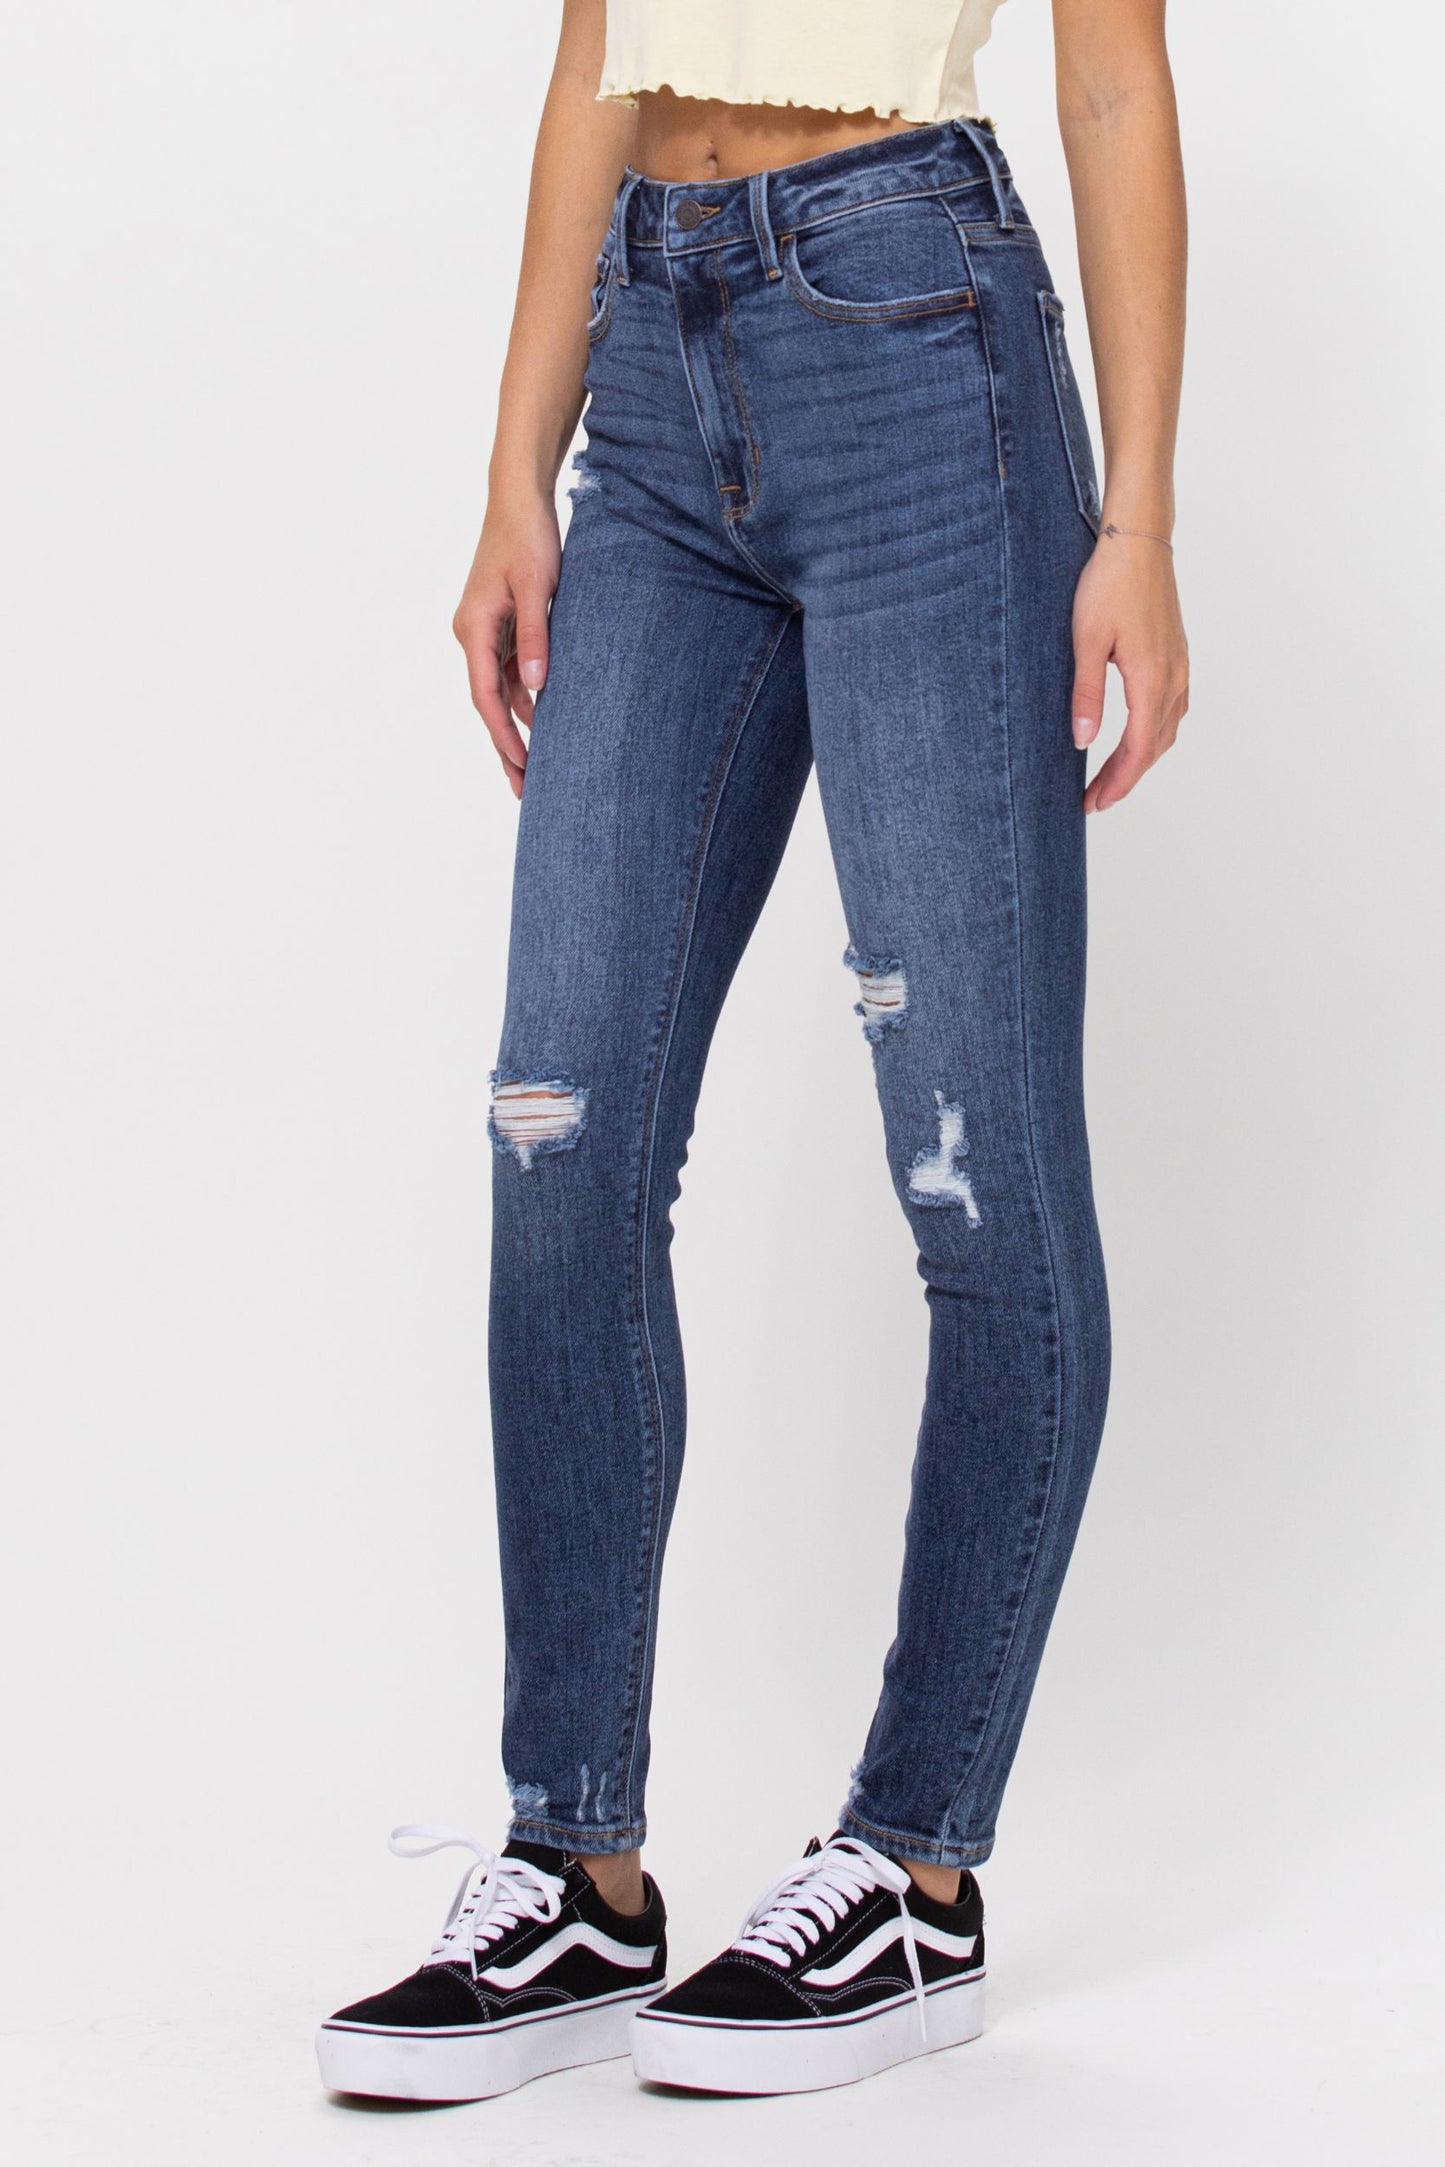 Cello Millie High Rise Destroyed Skinny Jean - Weeping Willow Boutique